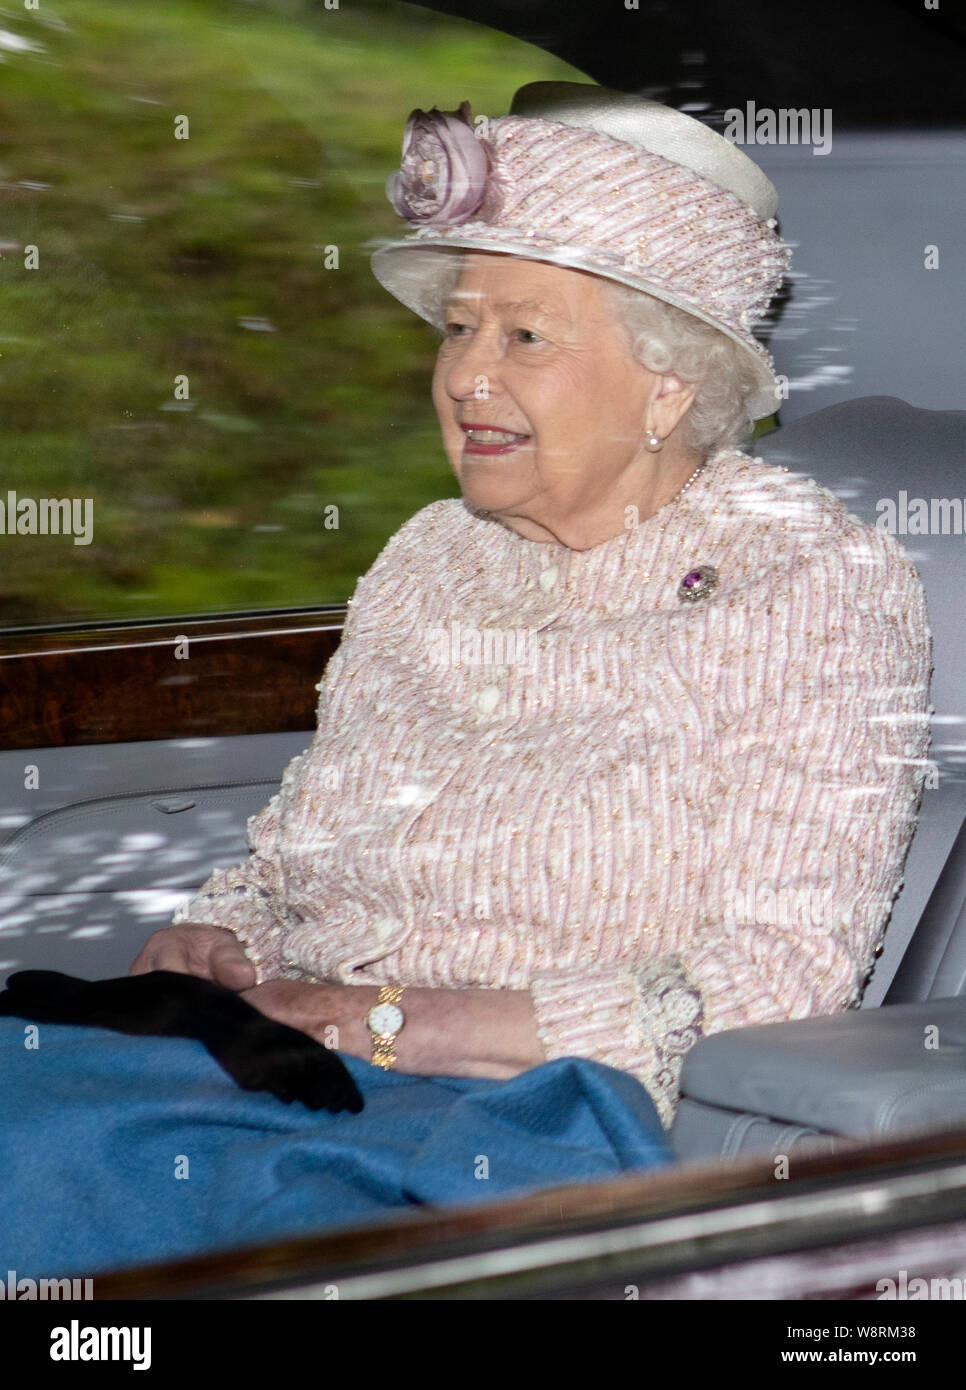 Queen Elizabeth II leaves Crathie Kirk after attending a Sunday church service near Balmoral where she is currently spending her summer holidays. Stock Photo